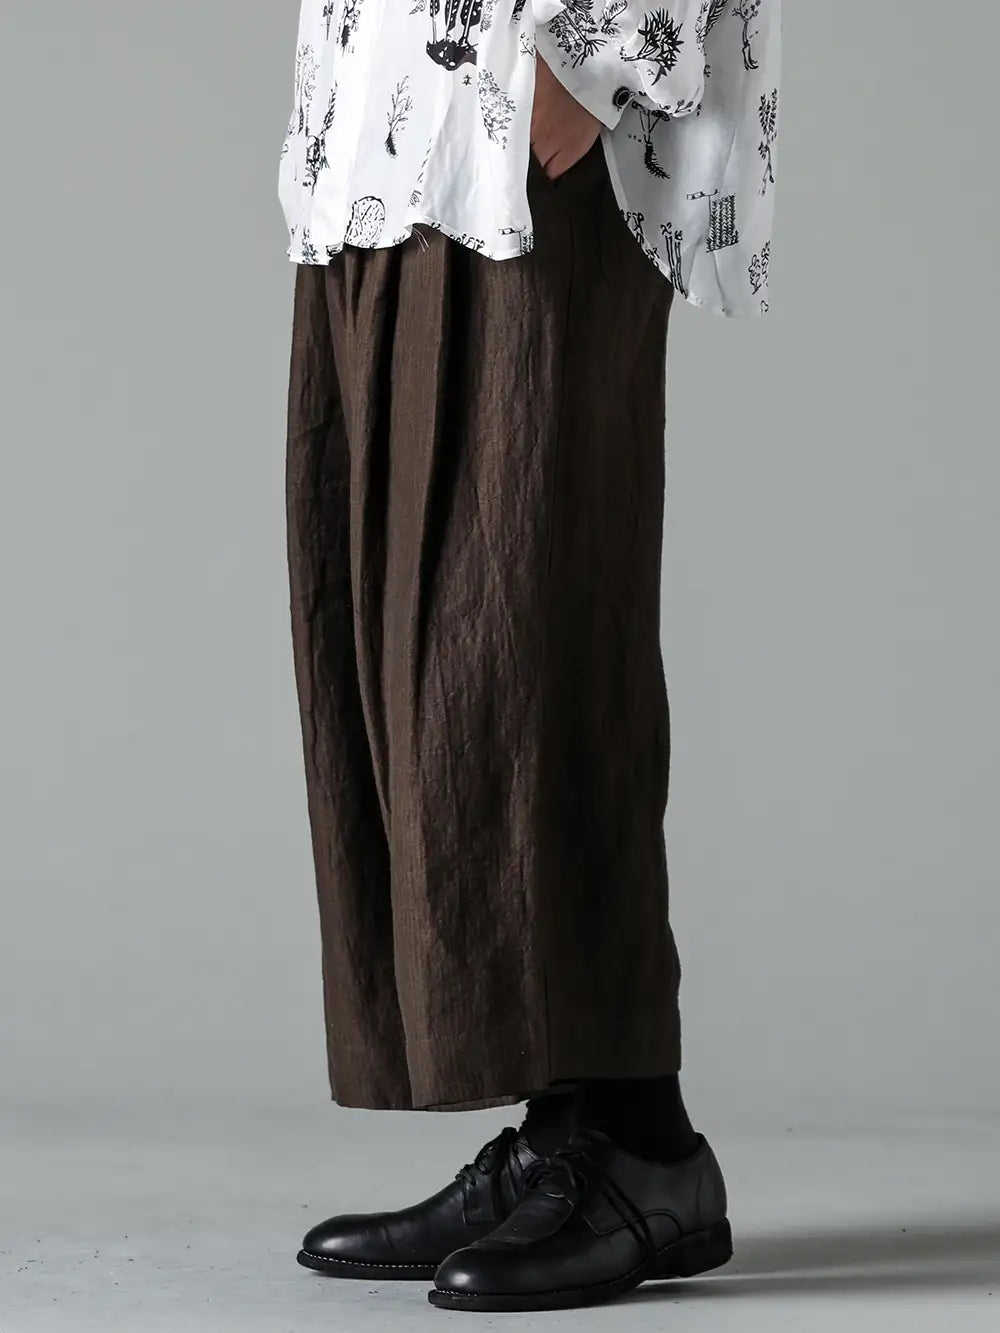 ZIGGY CHEN 24SS - Comfortable, casual fashion in a fashionable way - 0M2410509 Pleated Extra Wide Leg Trousers - 992x-black-guidi Classic Derby Shoes Laced Up Single Sole - Horse Full Grain - 992X Black 3-002